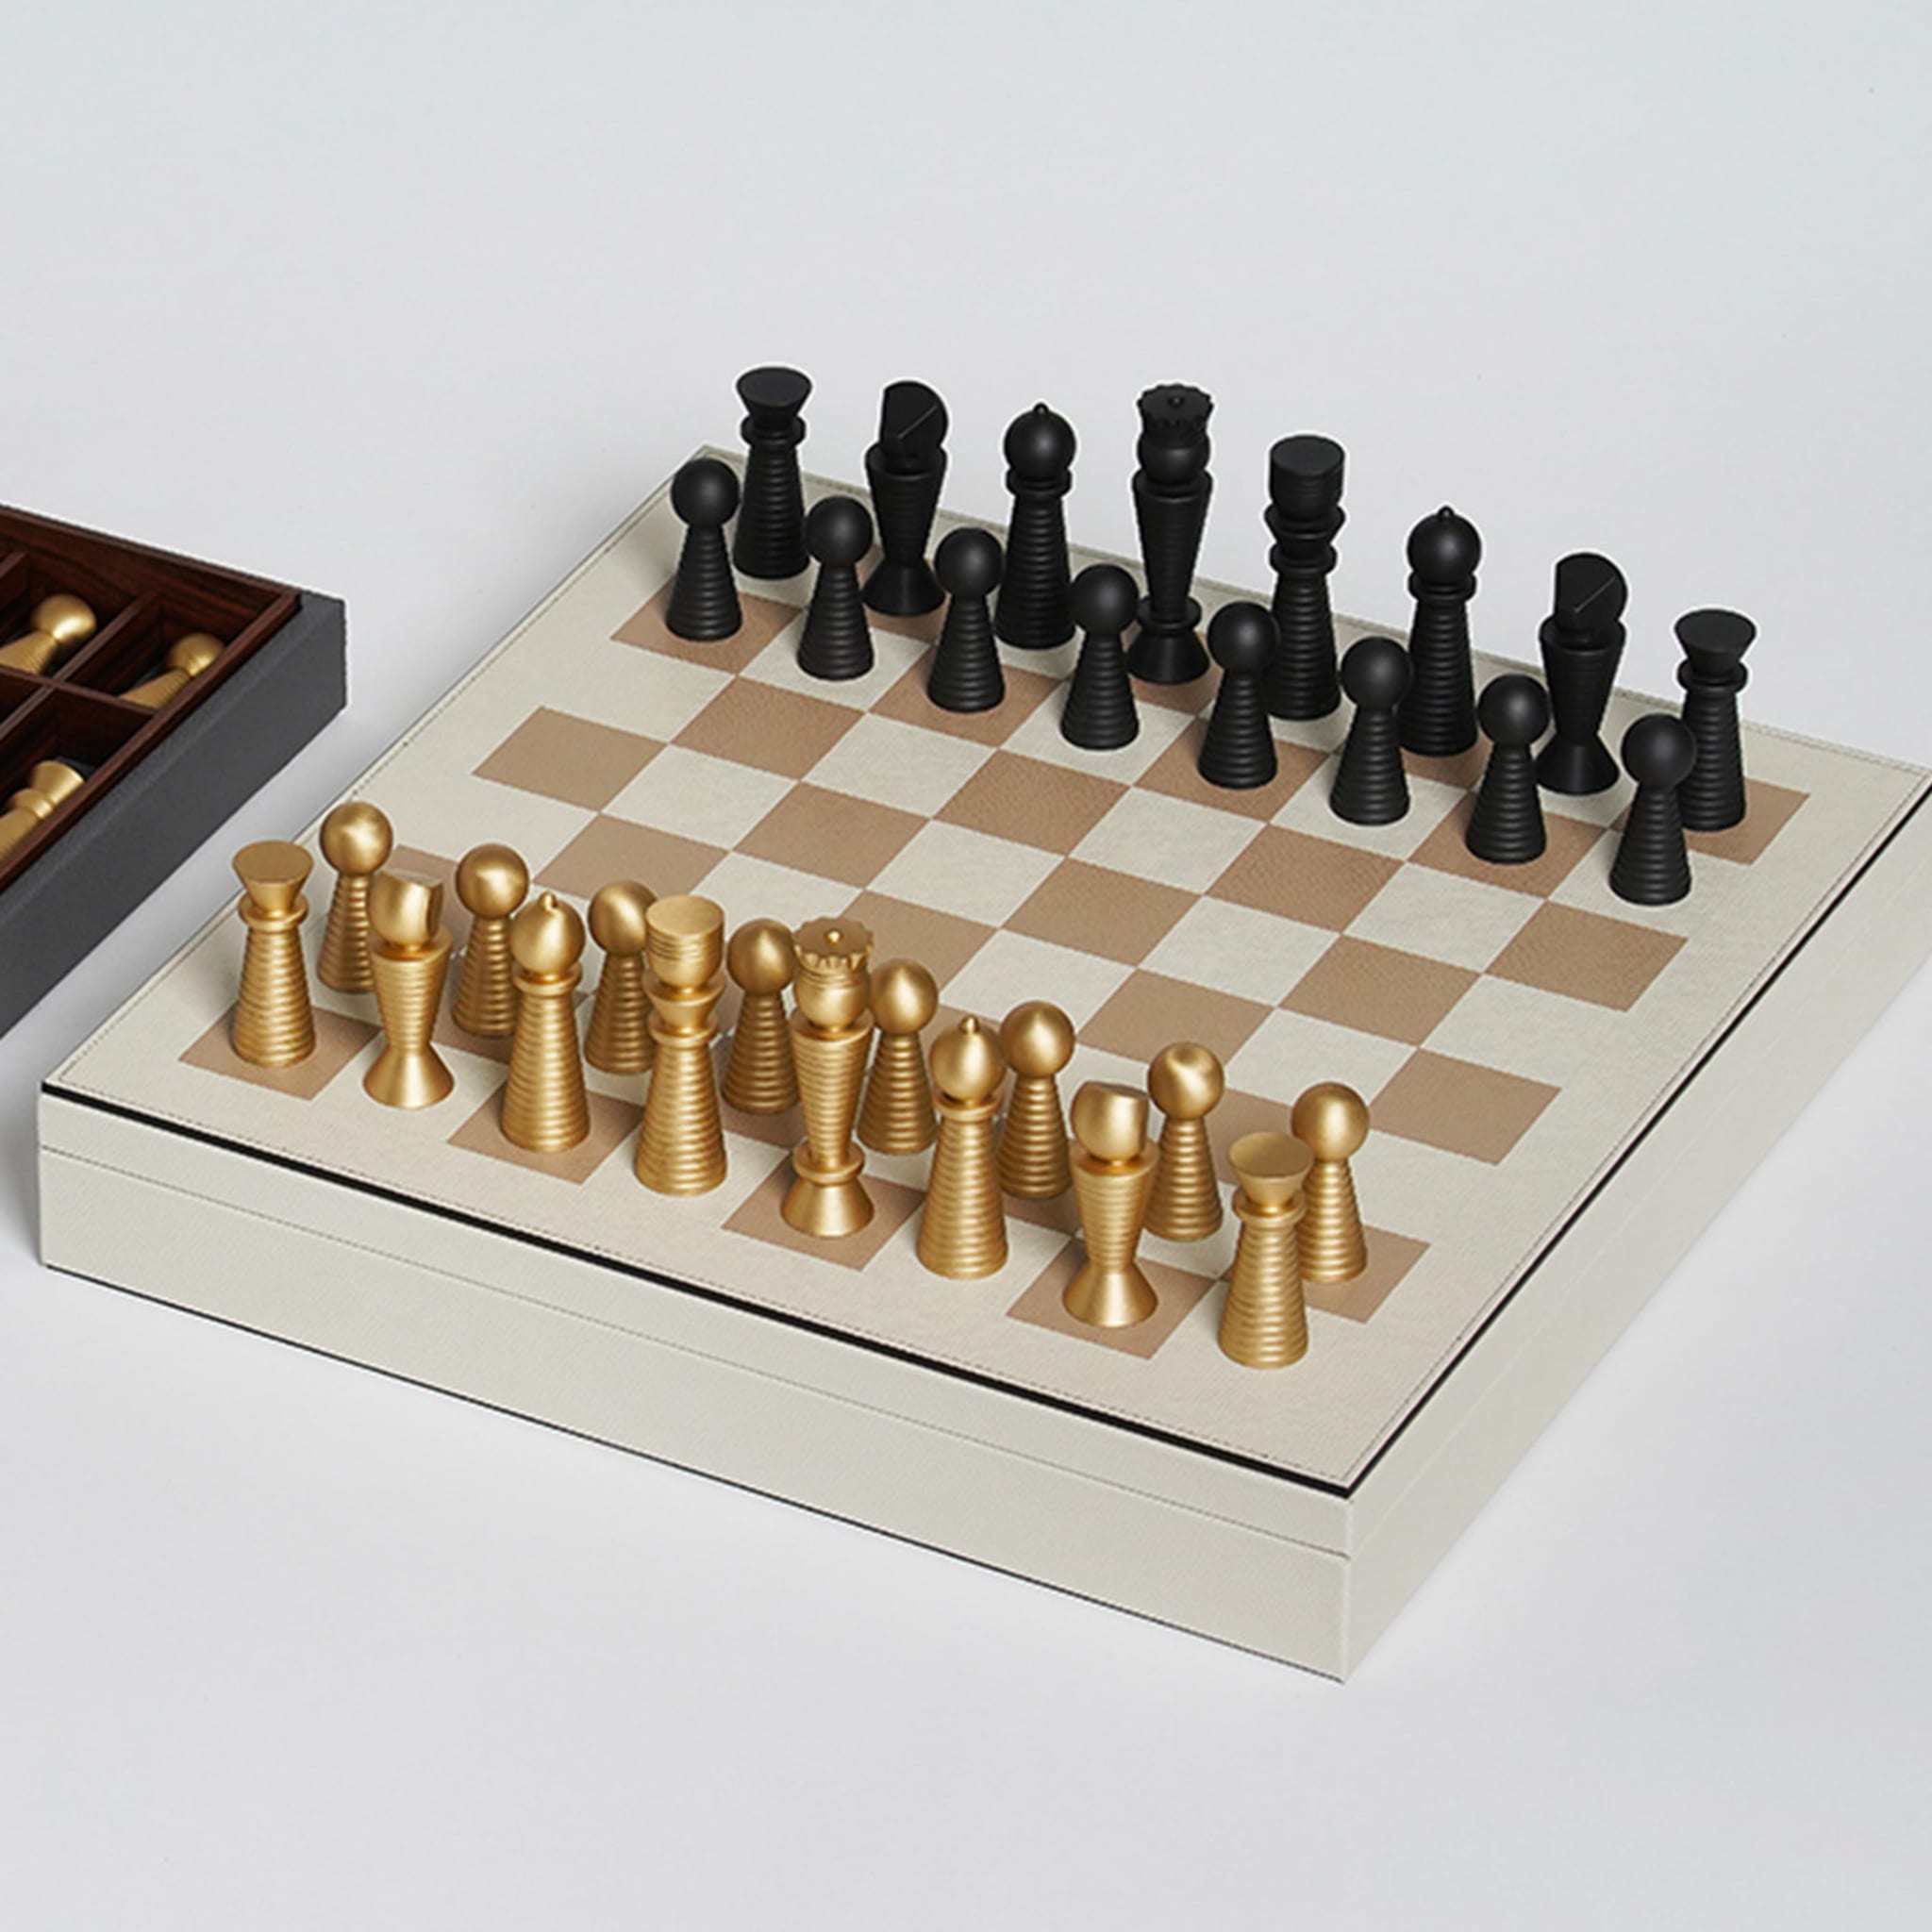 White Leather Chessboard - Alternative view 3